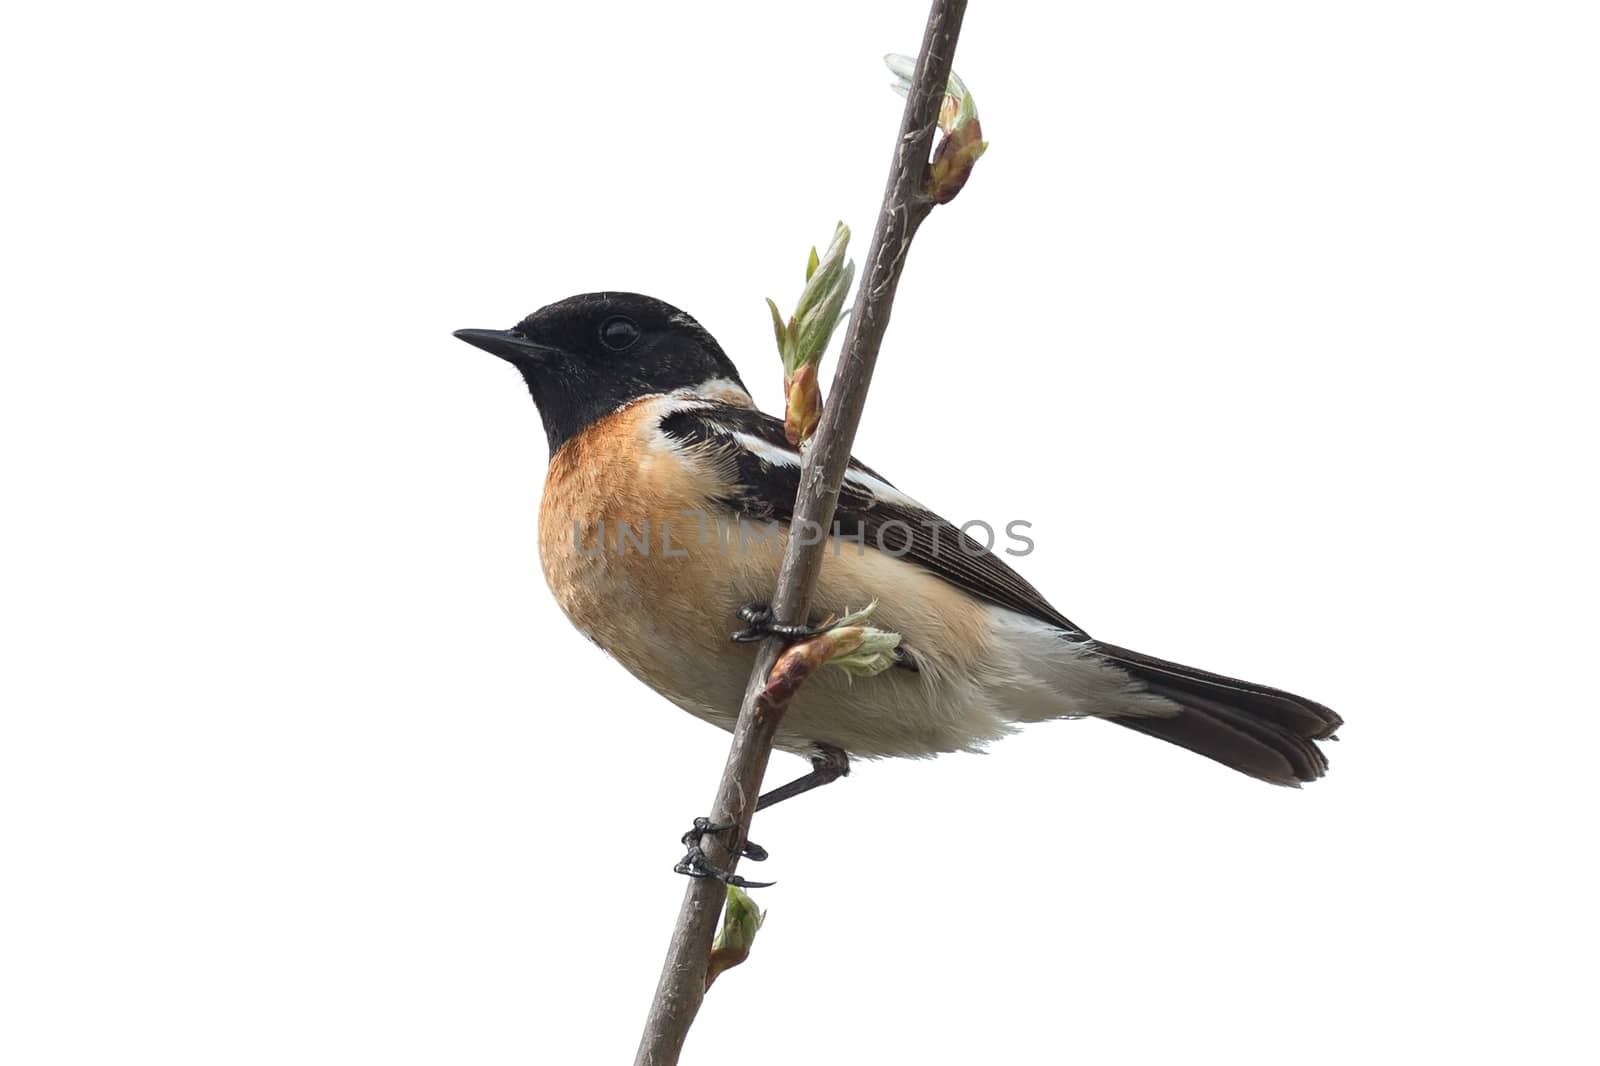 Male stonechat sitting on a branch isolated on white background